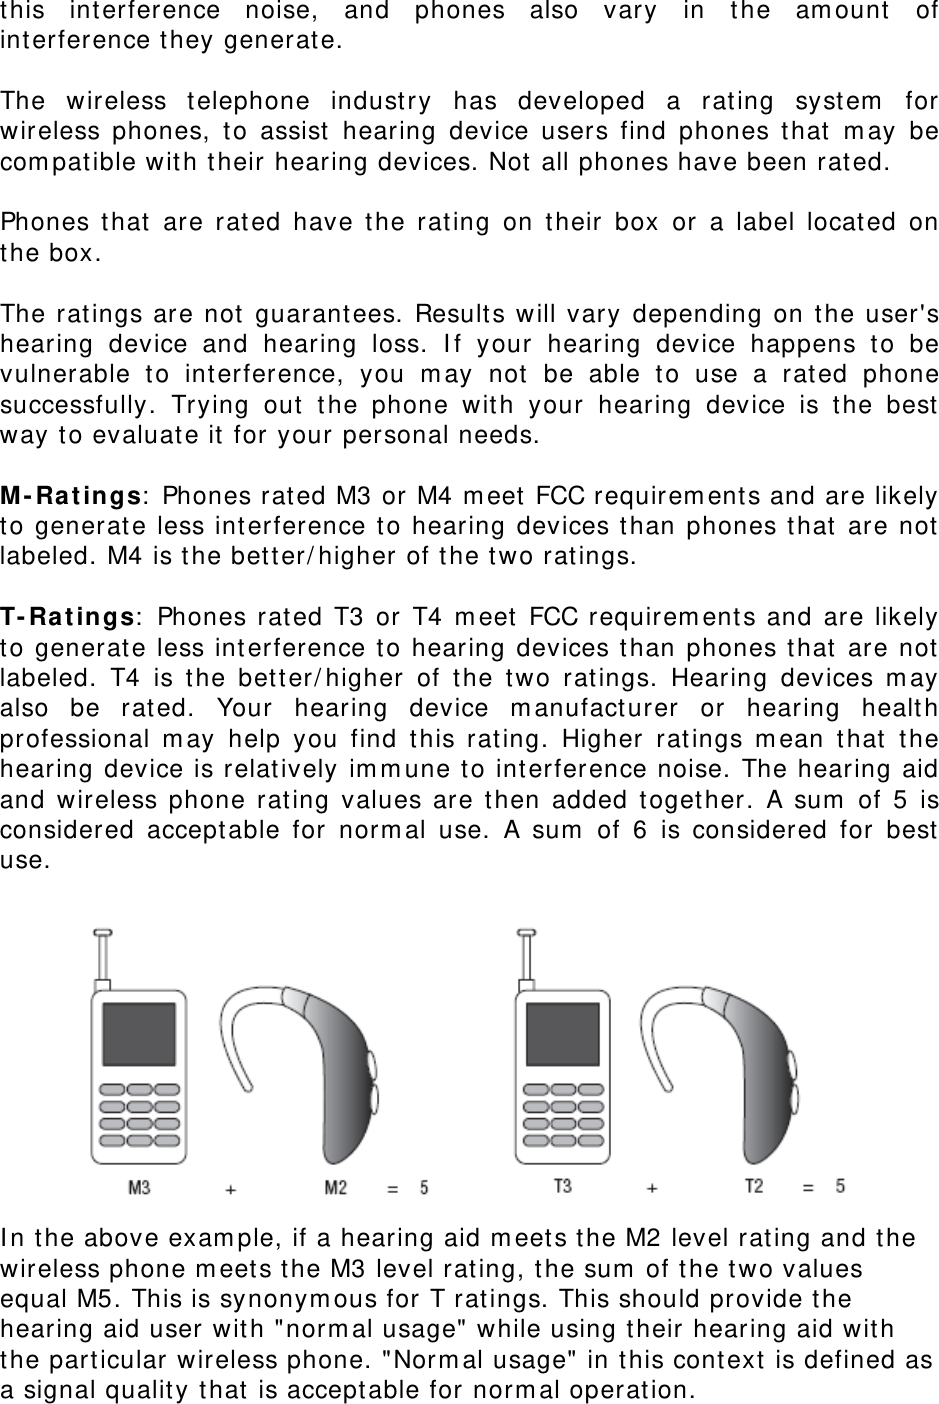 this int erference noise, and phones also vary in t he am ount  of interference they generat e.    The wireless telephone indust ry has developed a rat ing syst em  for wireless phones, to assist  hearing device users find phones t hat  m ay be com pat ible wit h t heir hearing devices. Not  all phones have been rat ed.      Phones t hat are rat ed have t he rating on t heir box or a label locat ed on the box.    The rat ings are not guarantees. Results will vary depending on t he user&apos;s hearing device and hearing loss. I f your hearing device happens to be vulnerable to int erference, you m ay not  be able t o use a rat ed phone successfully. Trying out  t he phone wit h your hearing device is the best  way to evaluate it  for your personal needs.  M- Ra t ings:  Phones rat ed M3 or M4 m eet  FCC requirem ents and are likely to generat e less int erference to hearing devices t han phones that  are not  labeled. M4 is t he bet t er/ higher of t he t w o rat ings.  T- Ra t ings:  Phones rated T3 or T4 m eet  FCC requirem ent s and are likely to generat e less int erference to hearing devices t han phones that  are not  labeled. T4 is t he bet t er/ higher of the t wo rat ings. Hearing devices m ay also be rated. Your hearing device m anufacturer or hearing healt h professional m ay help you find t his rating. Higher rat ings m ean t hat t he hearing device is relat ively im m une to interference noise. The hearing aid and wireless phone rating values are t hen added t oget her. A sum  of 5 is considered accept able for norm al use. A sum  of 6 is considered for best  use.   I n the above exam ple, if a hearing aid m eet s t he M2 level rat ing and t he wireless phone m eet s t he M3 level rat ing, t he sum  of t he t wo values equal M5. This is synonym ous for  T rat ings. This should provide t he hearing aid user wit h &quot;norm al usage&quot; while using t heir hearing aid wit h the particular wireless phone. &quot;Norm al usage&quot; in t his context  is defined as a signal qualit y t hat  is accept able for norm al operat ion. 